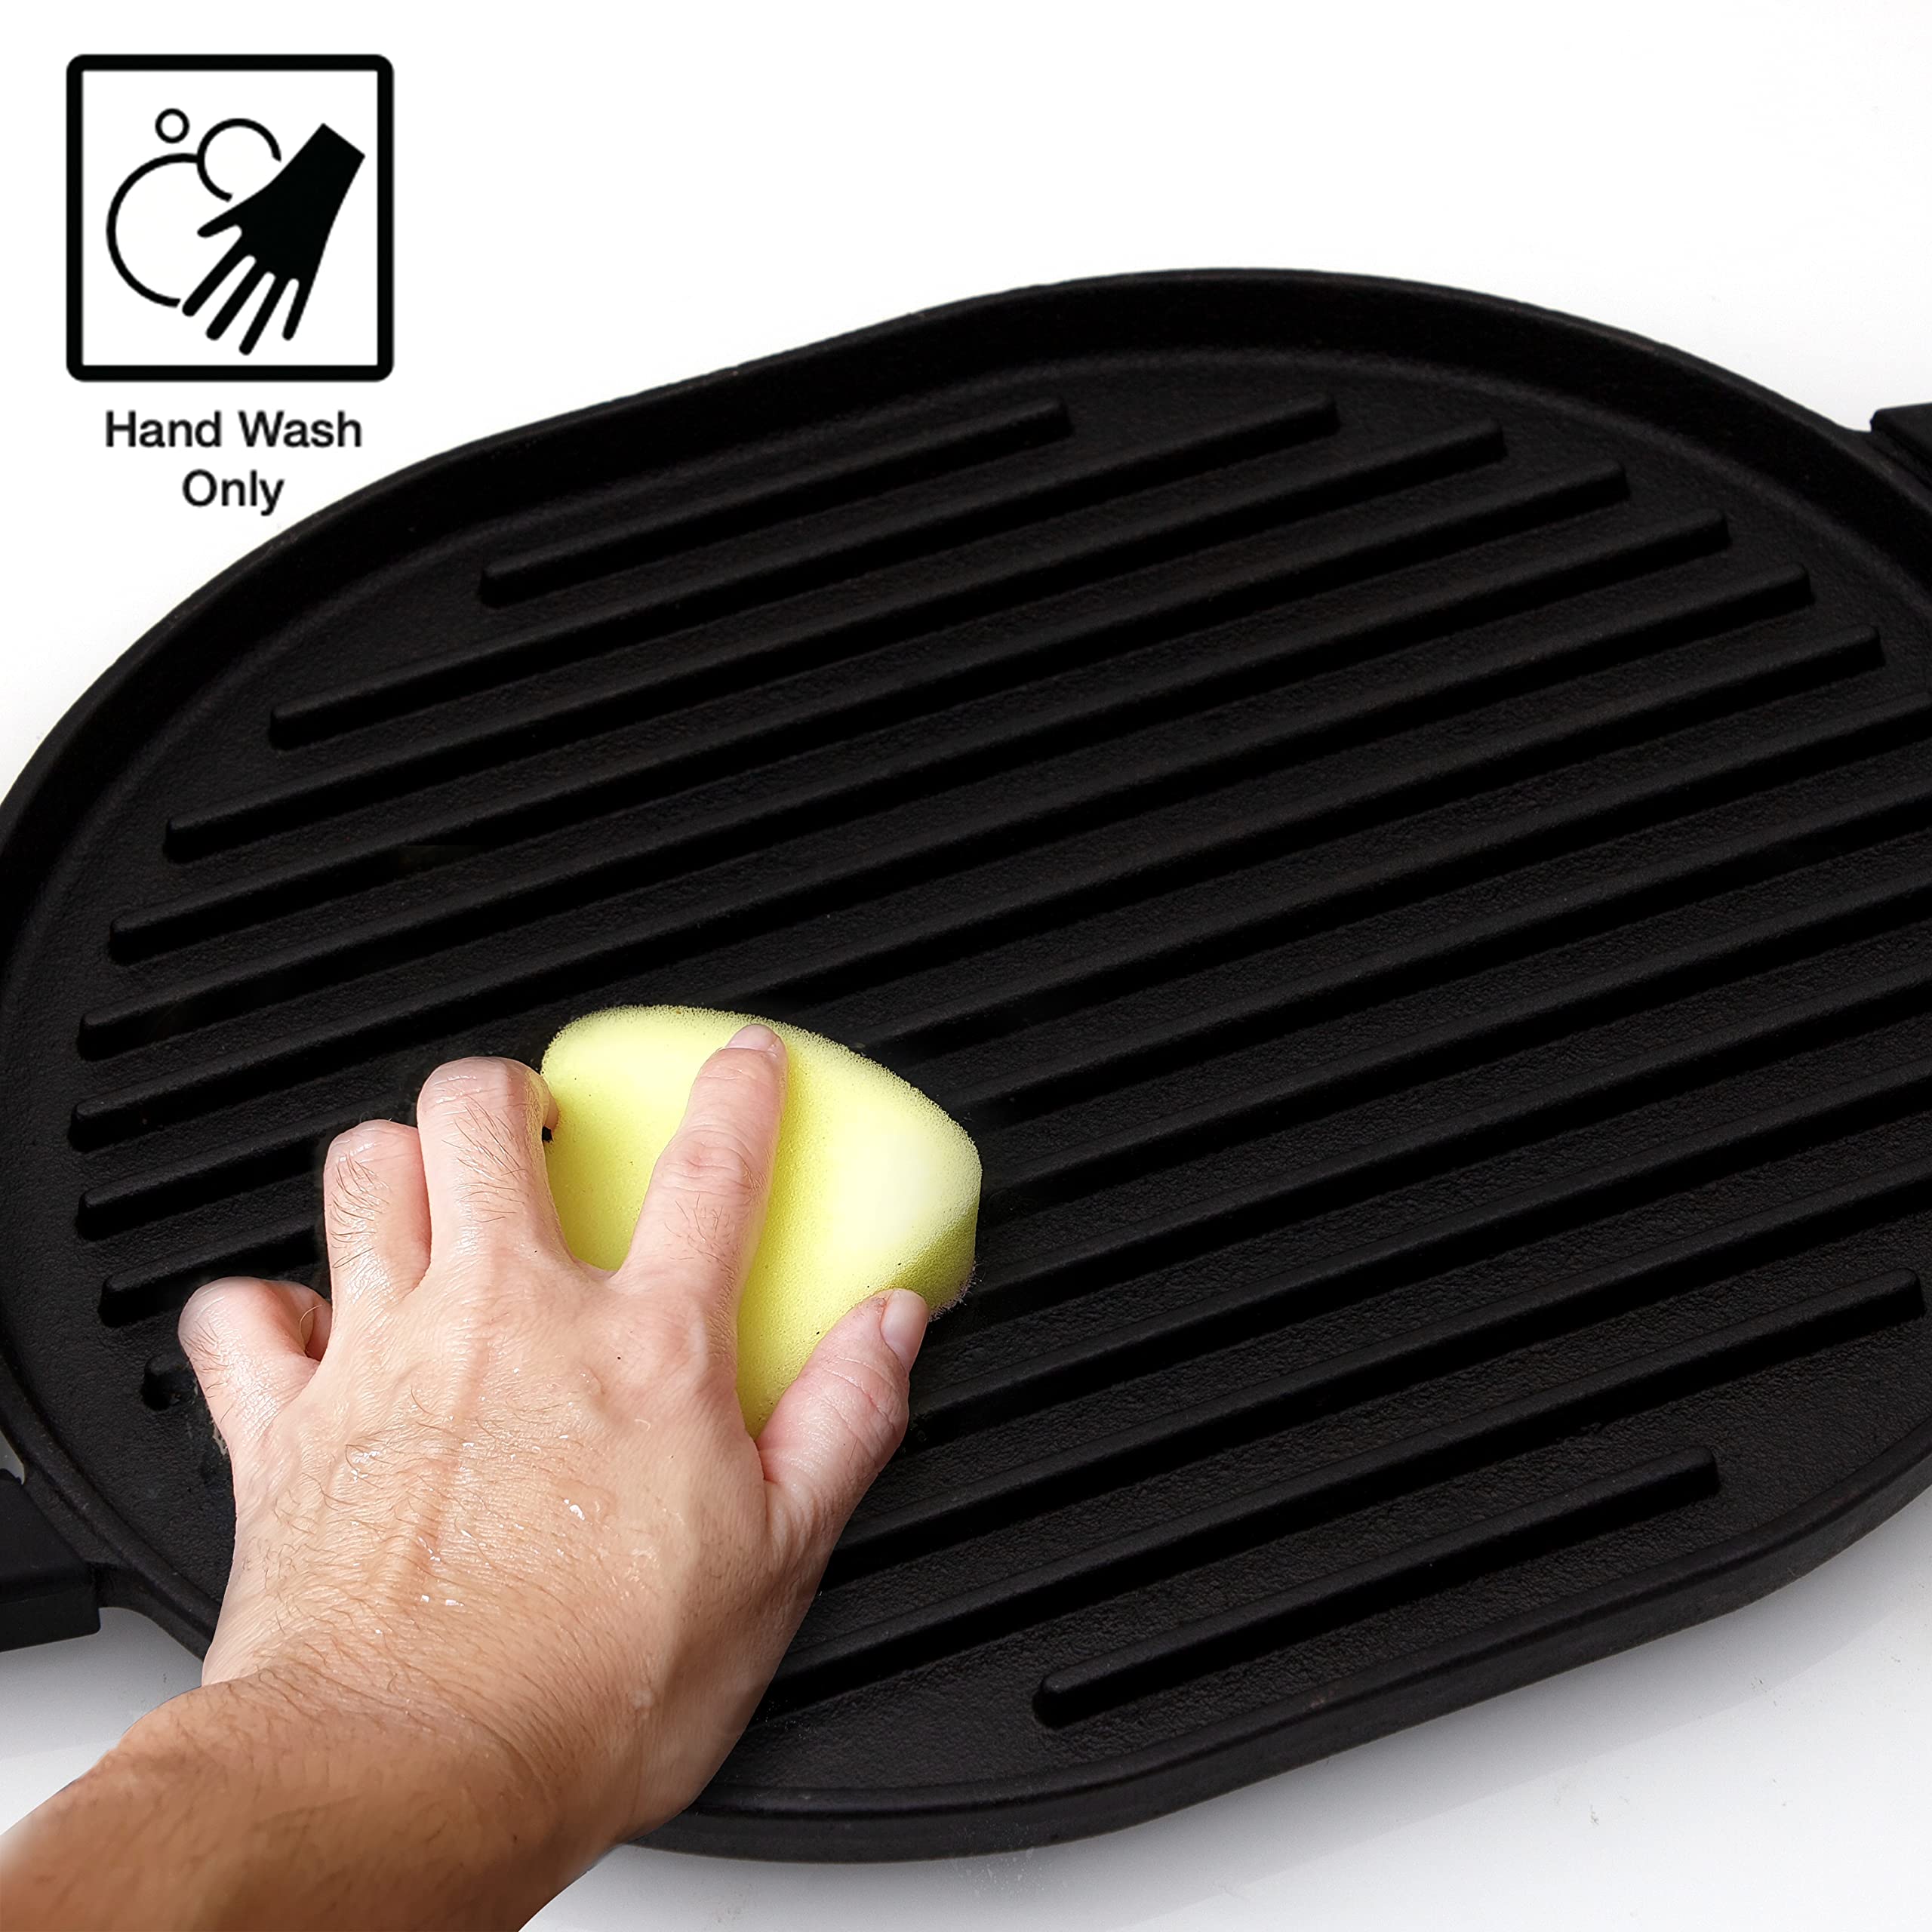 Nuwave Cast Iron Grill, 12.42”x10.21” Non-Stick Grilling Surface, Deep Grill Ridges, Pre-Seasoned, Stay-Cool Silicone Handles, Easy-to-Clean, Oven Safe, Stovetop, BBQ, Fire & Smoker, Induction-Ready